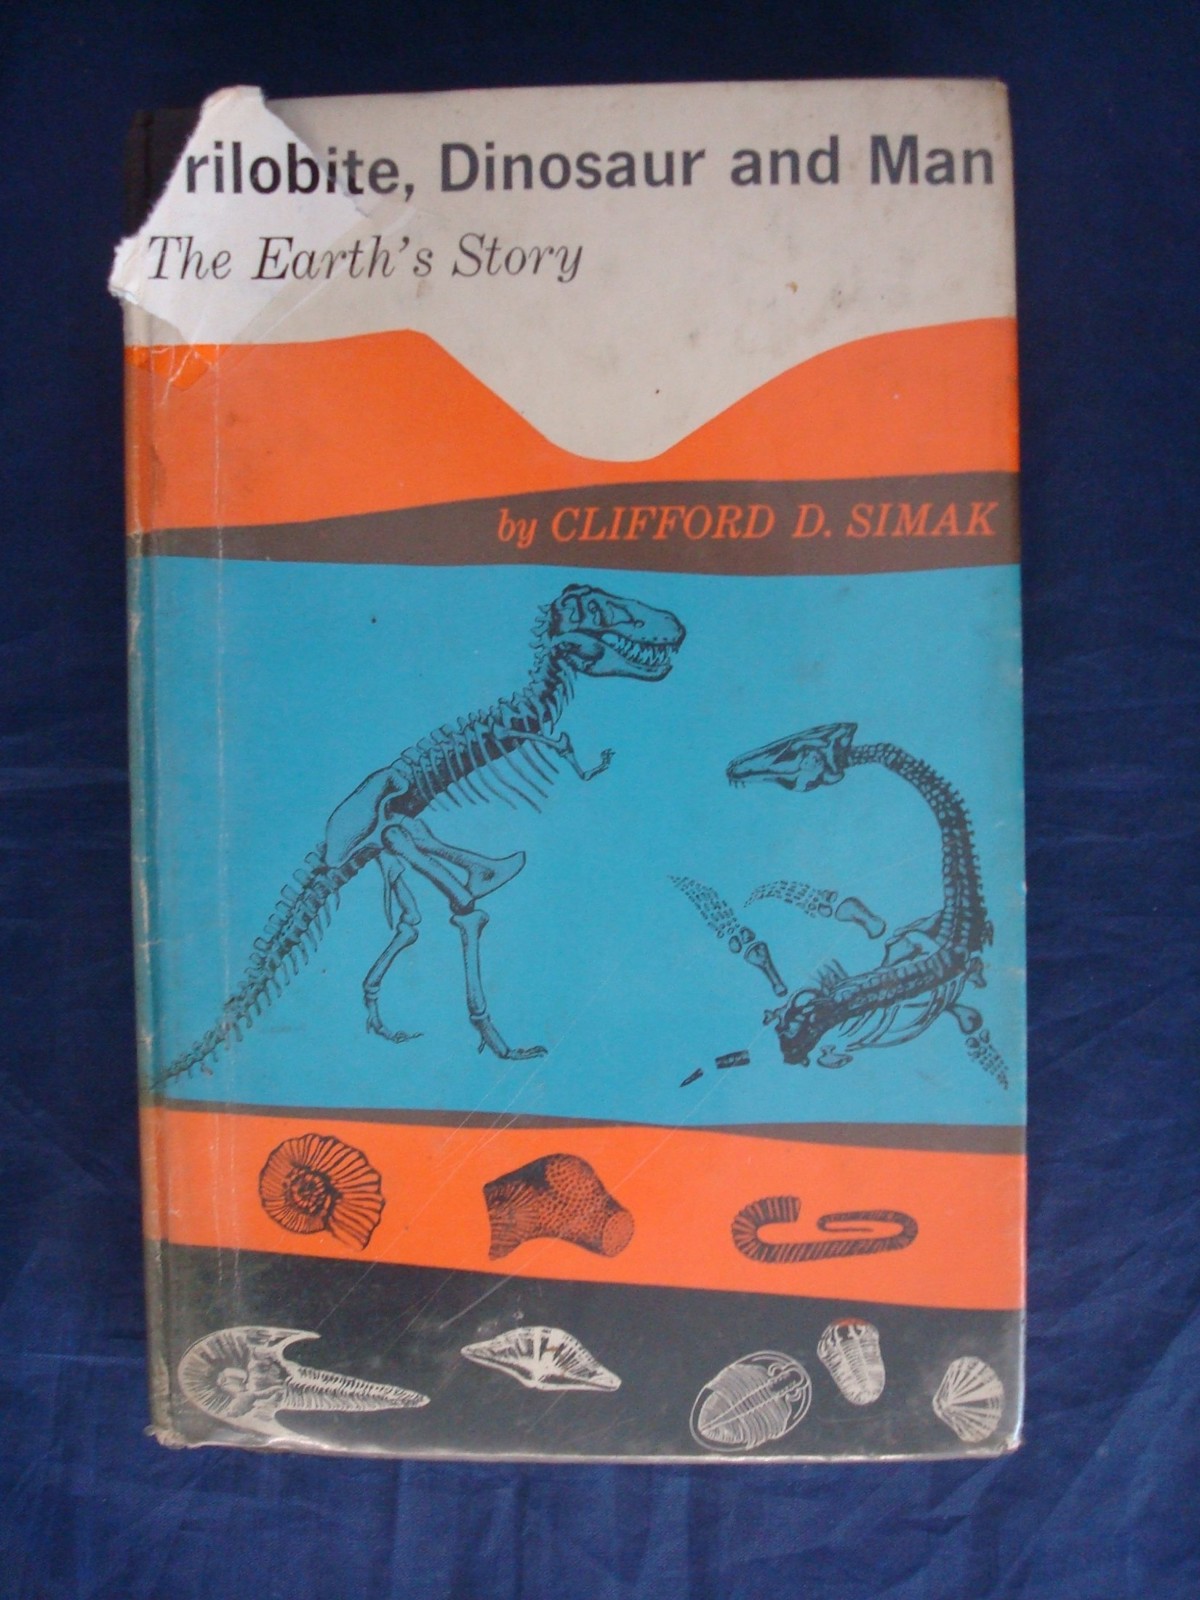 Trilobite, Dinosaur, and Man: The Earth's Story